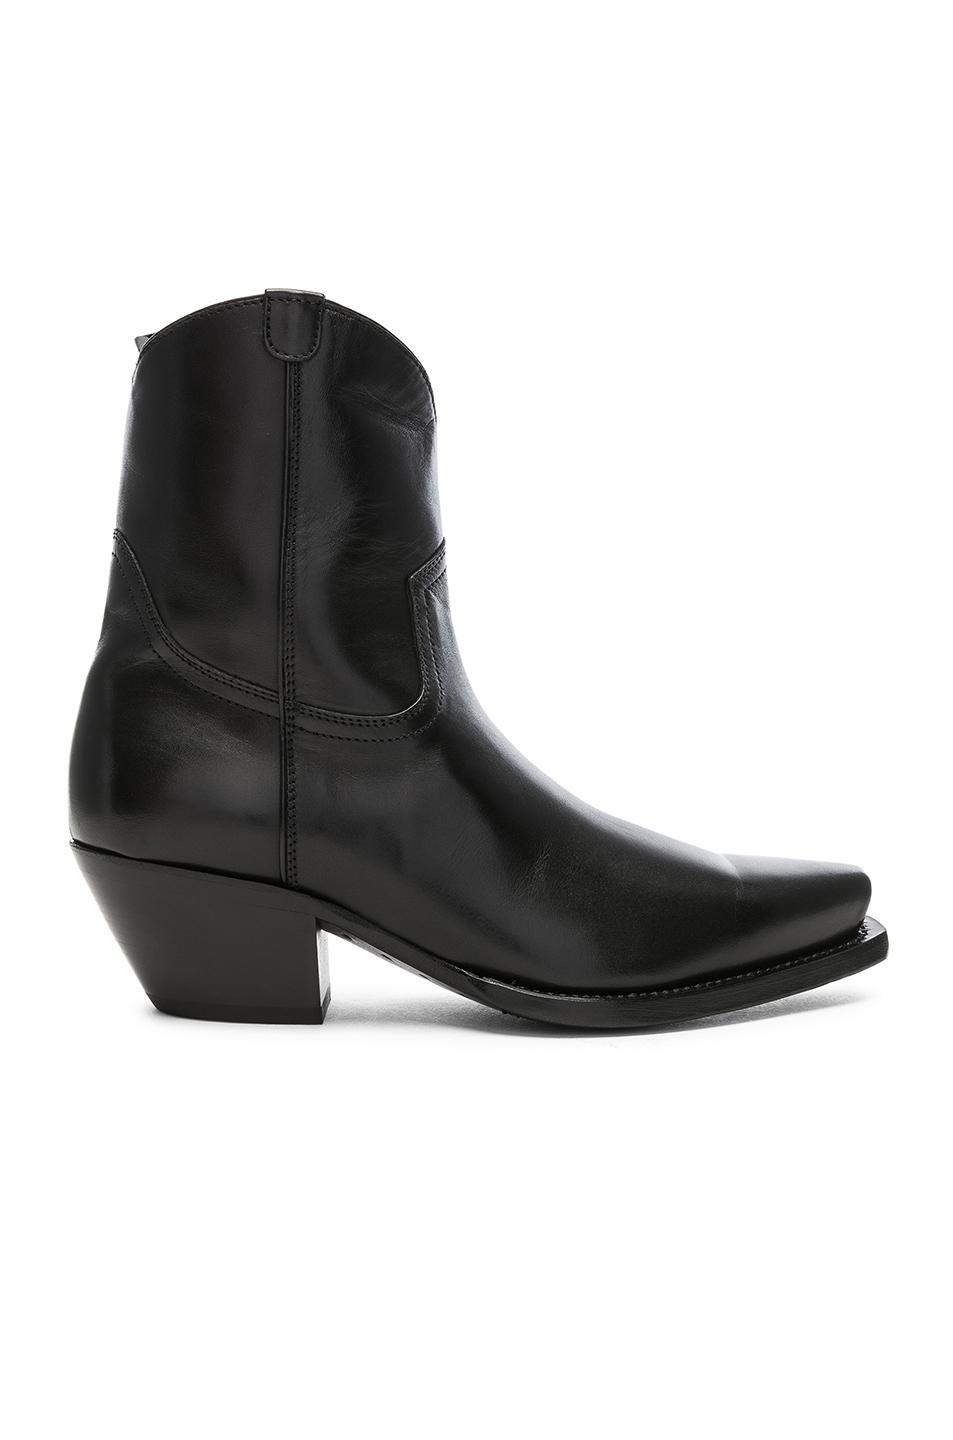 R13 Leather Cowboy Ankle Boots in Black - Lyst